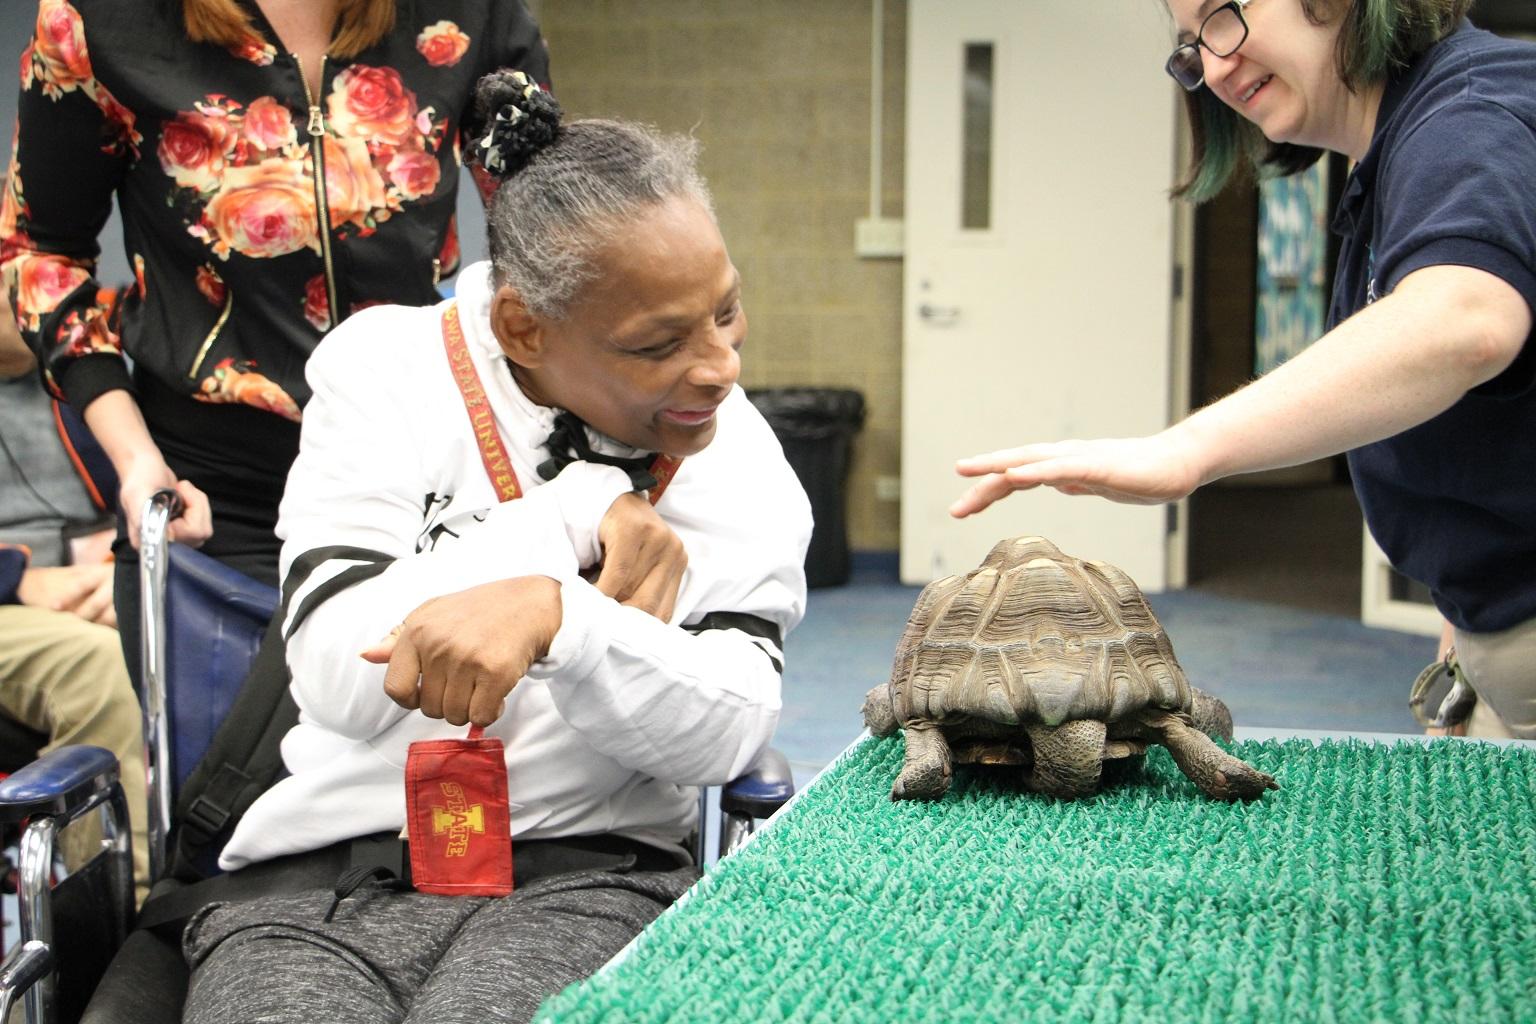 A member of the Envision Unlimited Rose Center, a program for people with intellectual and developmental disabilities, comes face-to-face with a tortoise at Shedd Aquarium. (Em Hall / Envision Unlimited)